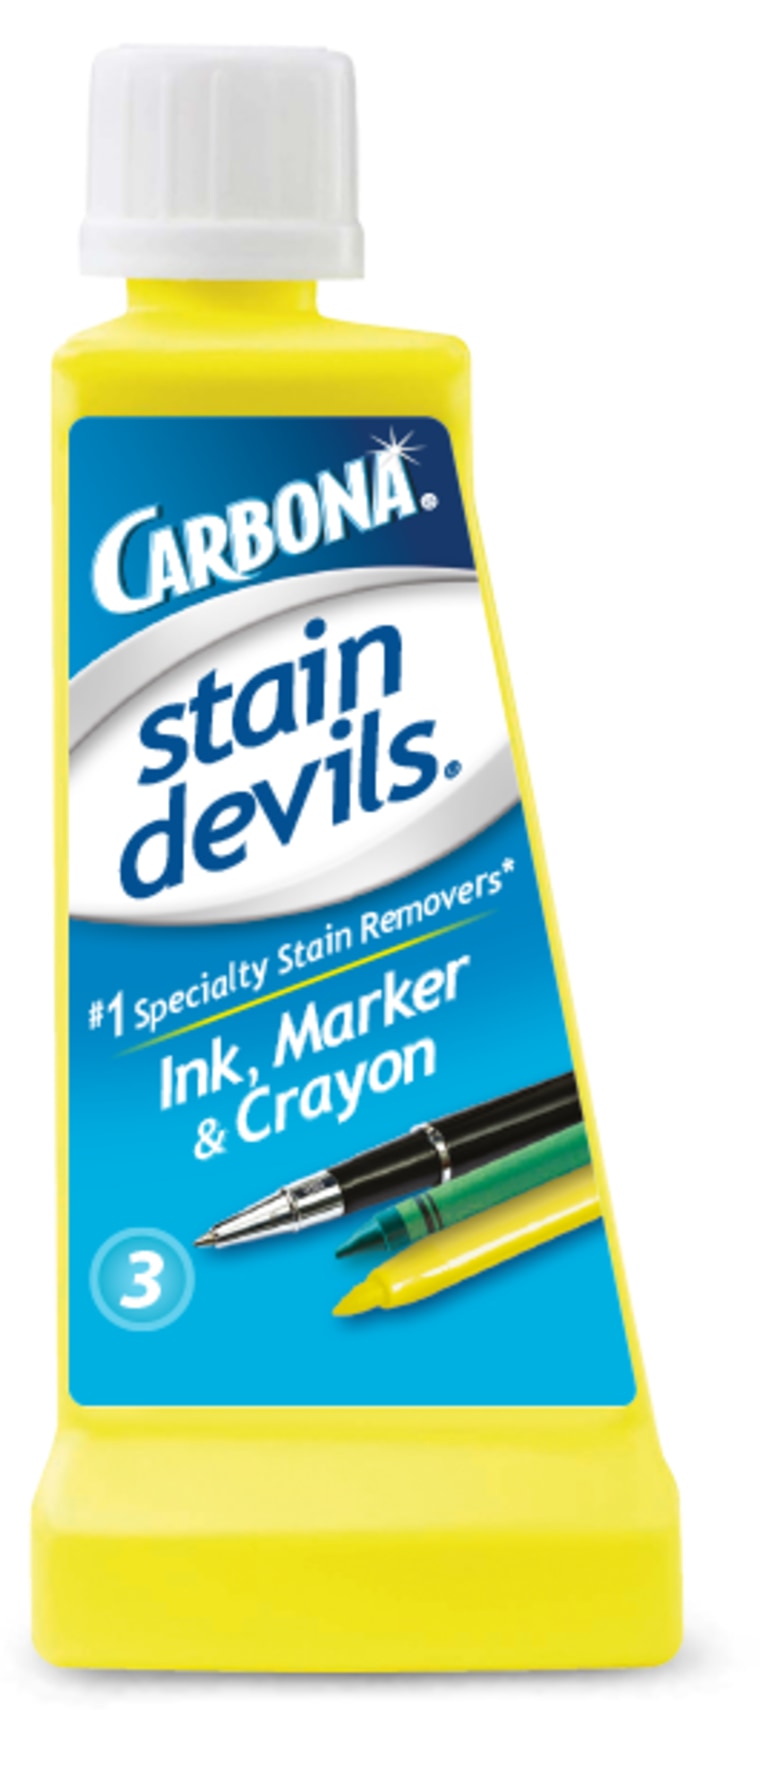 How To Remove Ink Stains From Carpet - www.inf-inet.com